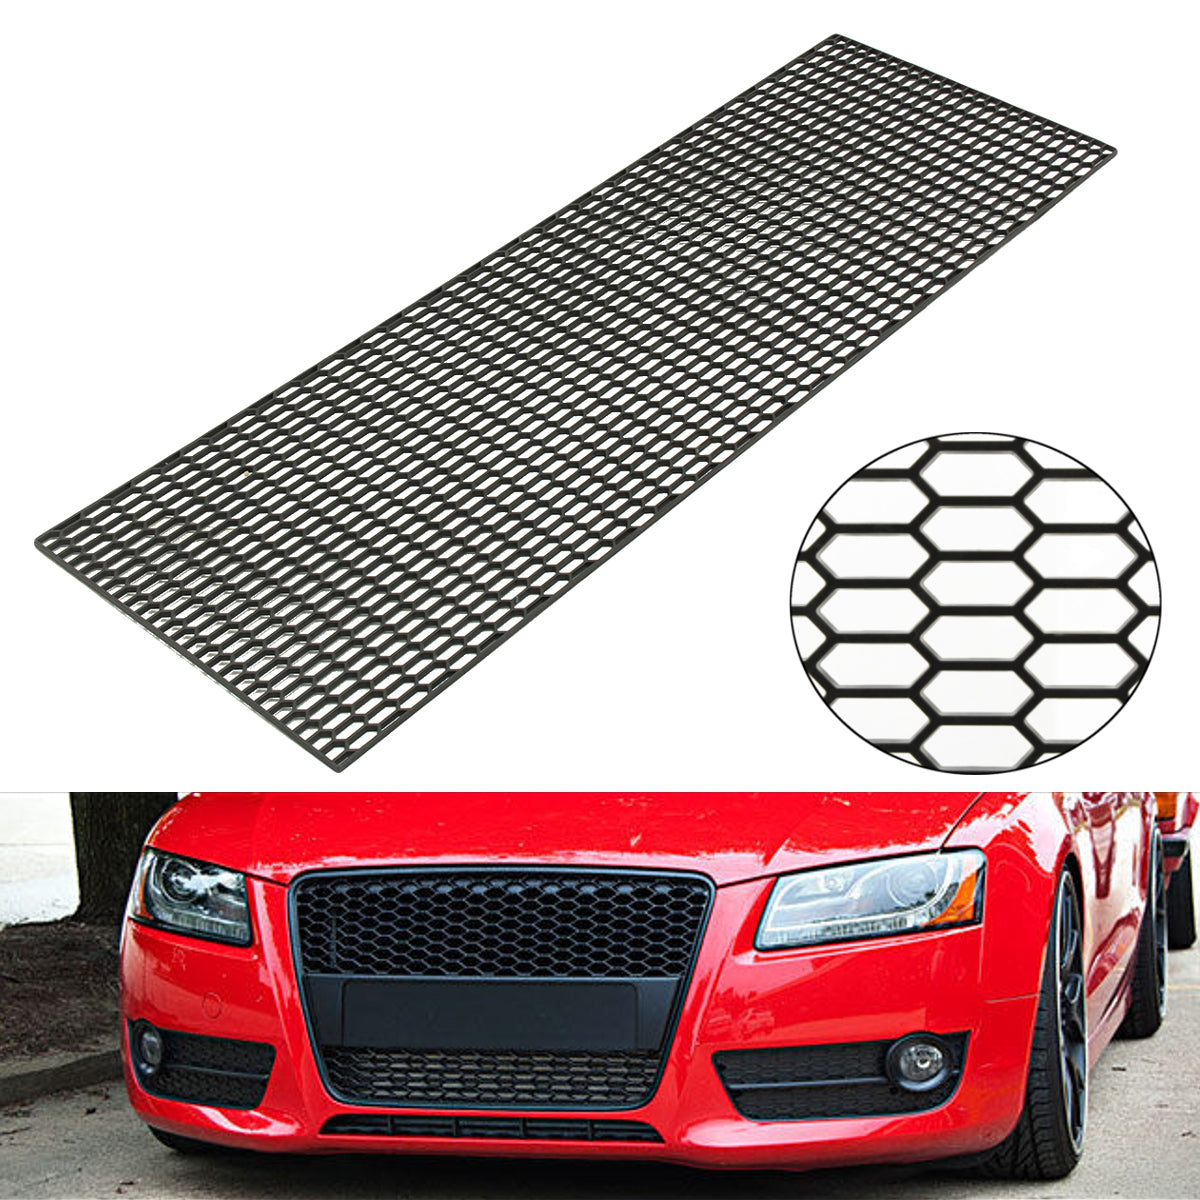 Red 120X40cm ABS Plastic Car Styling Air Intake Racing Honeycomb Meshed Grille Spoiler Bumper Hood Vent Universal